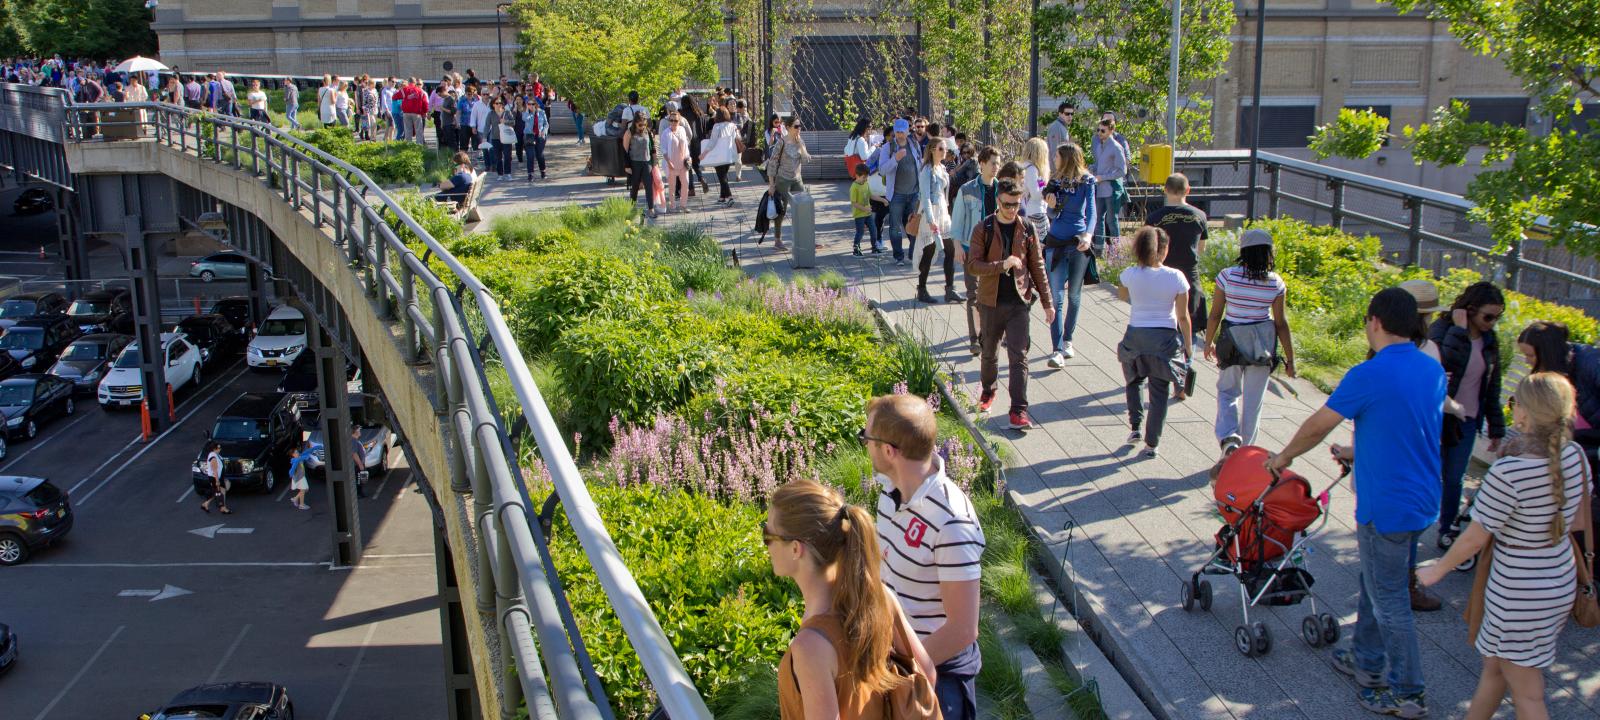 More than 20 million people have visited the High Line Park so far.